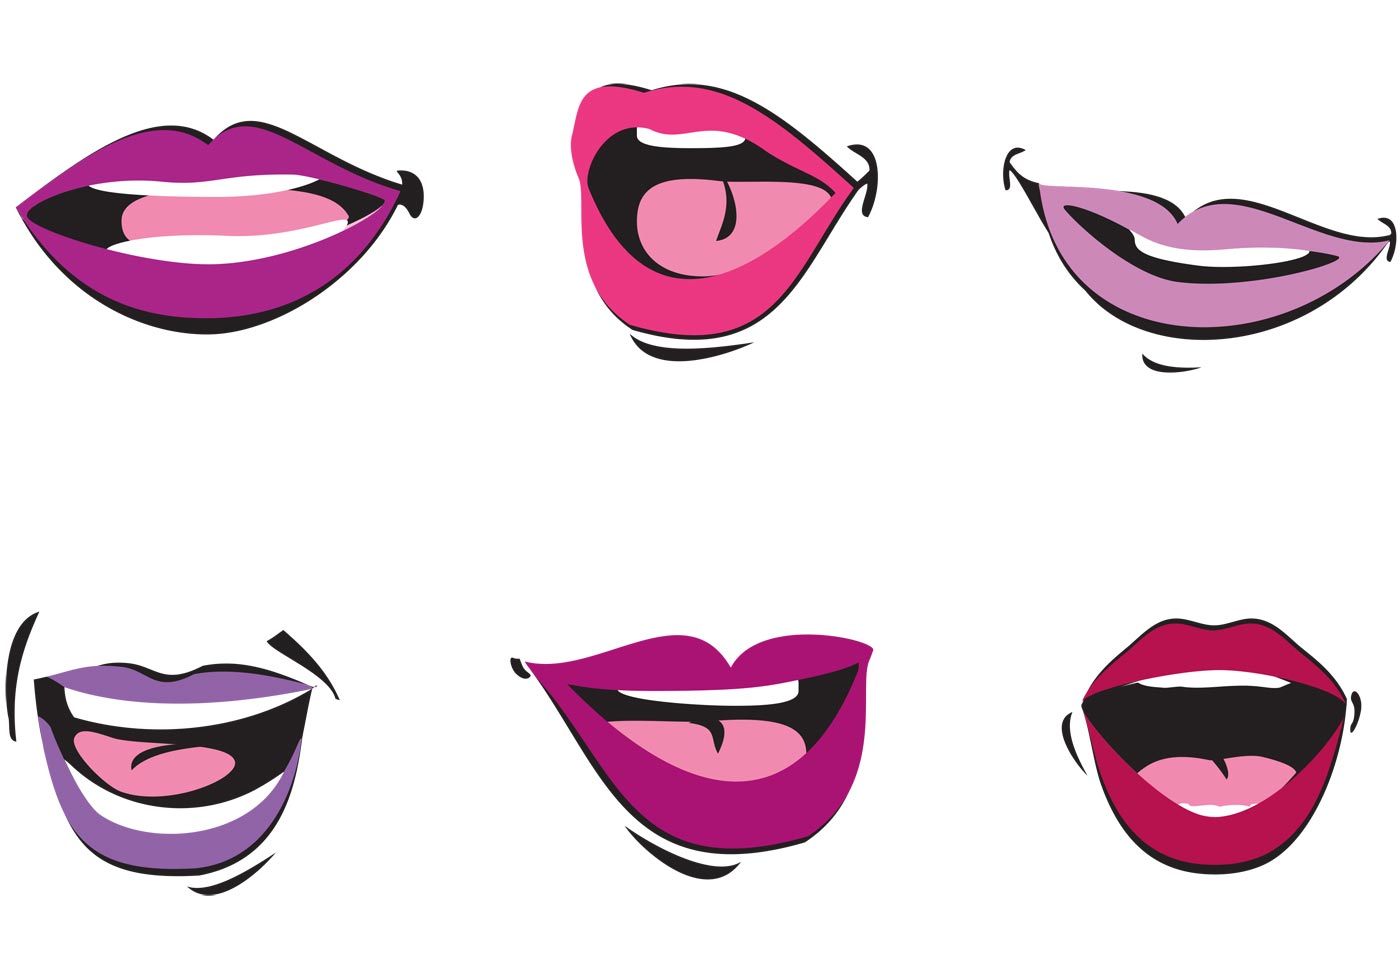 Mouth Free Vector Art - (3282 Free Downloads)